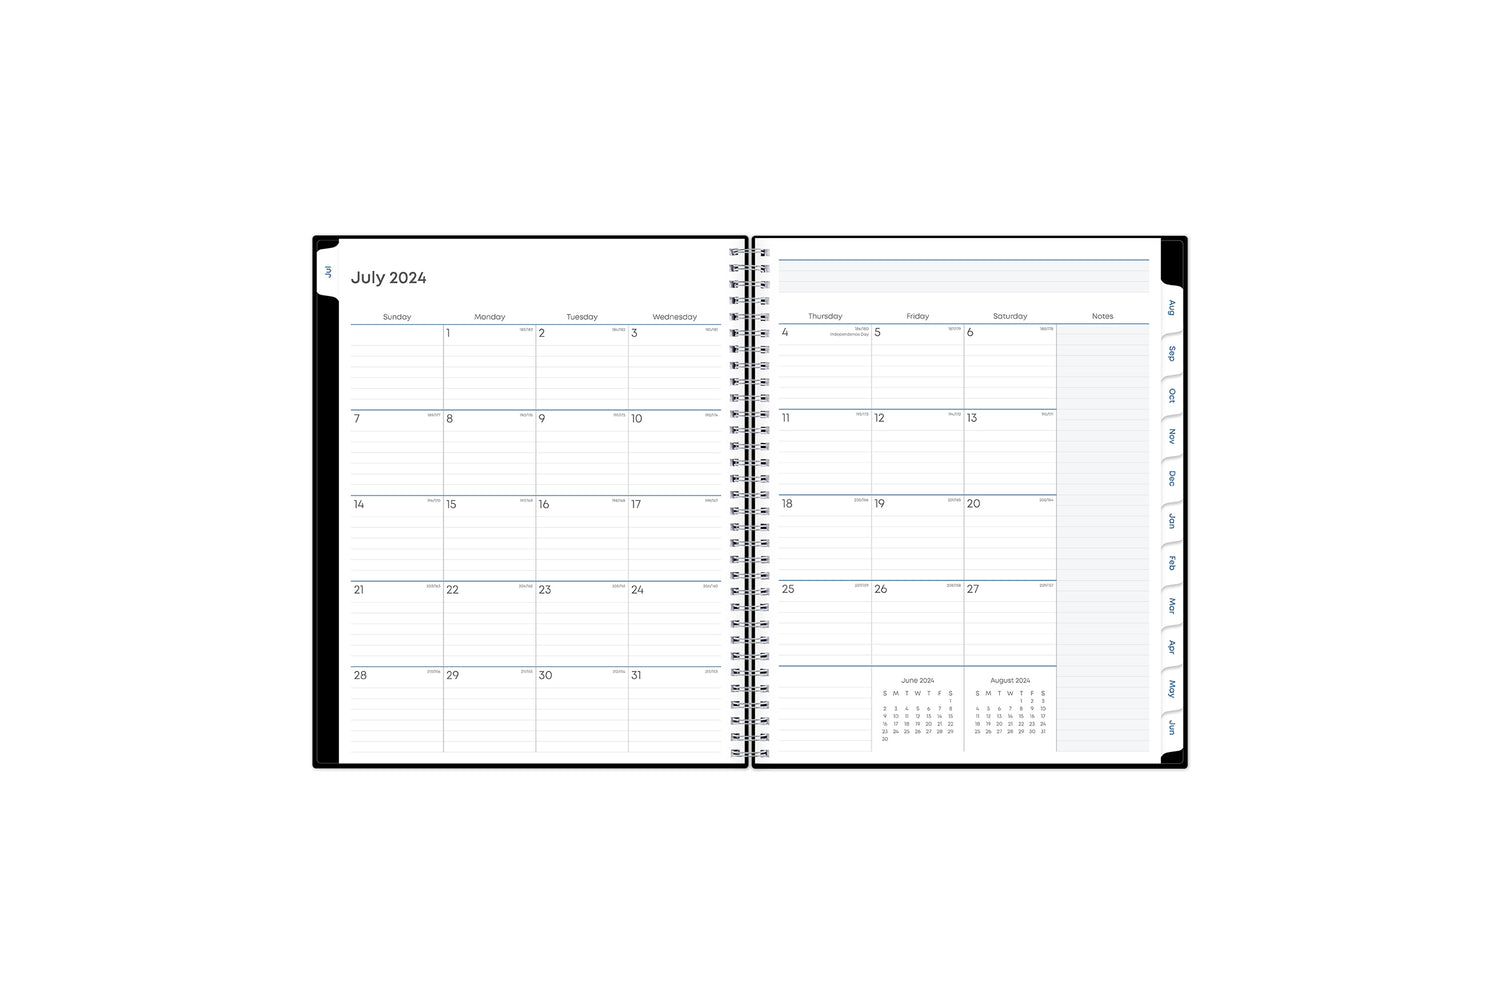  teacher lesson planner monthly view featuring ample lined writing space for projects, field trips, goals, deadlines, notes section, reference calendars and white monthly tabs in 8.5x11 size